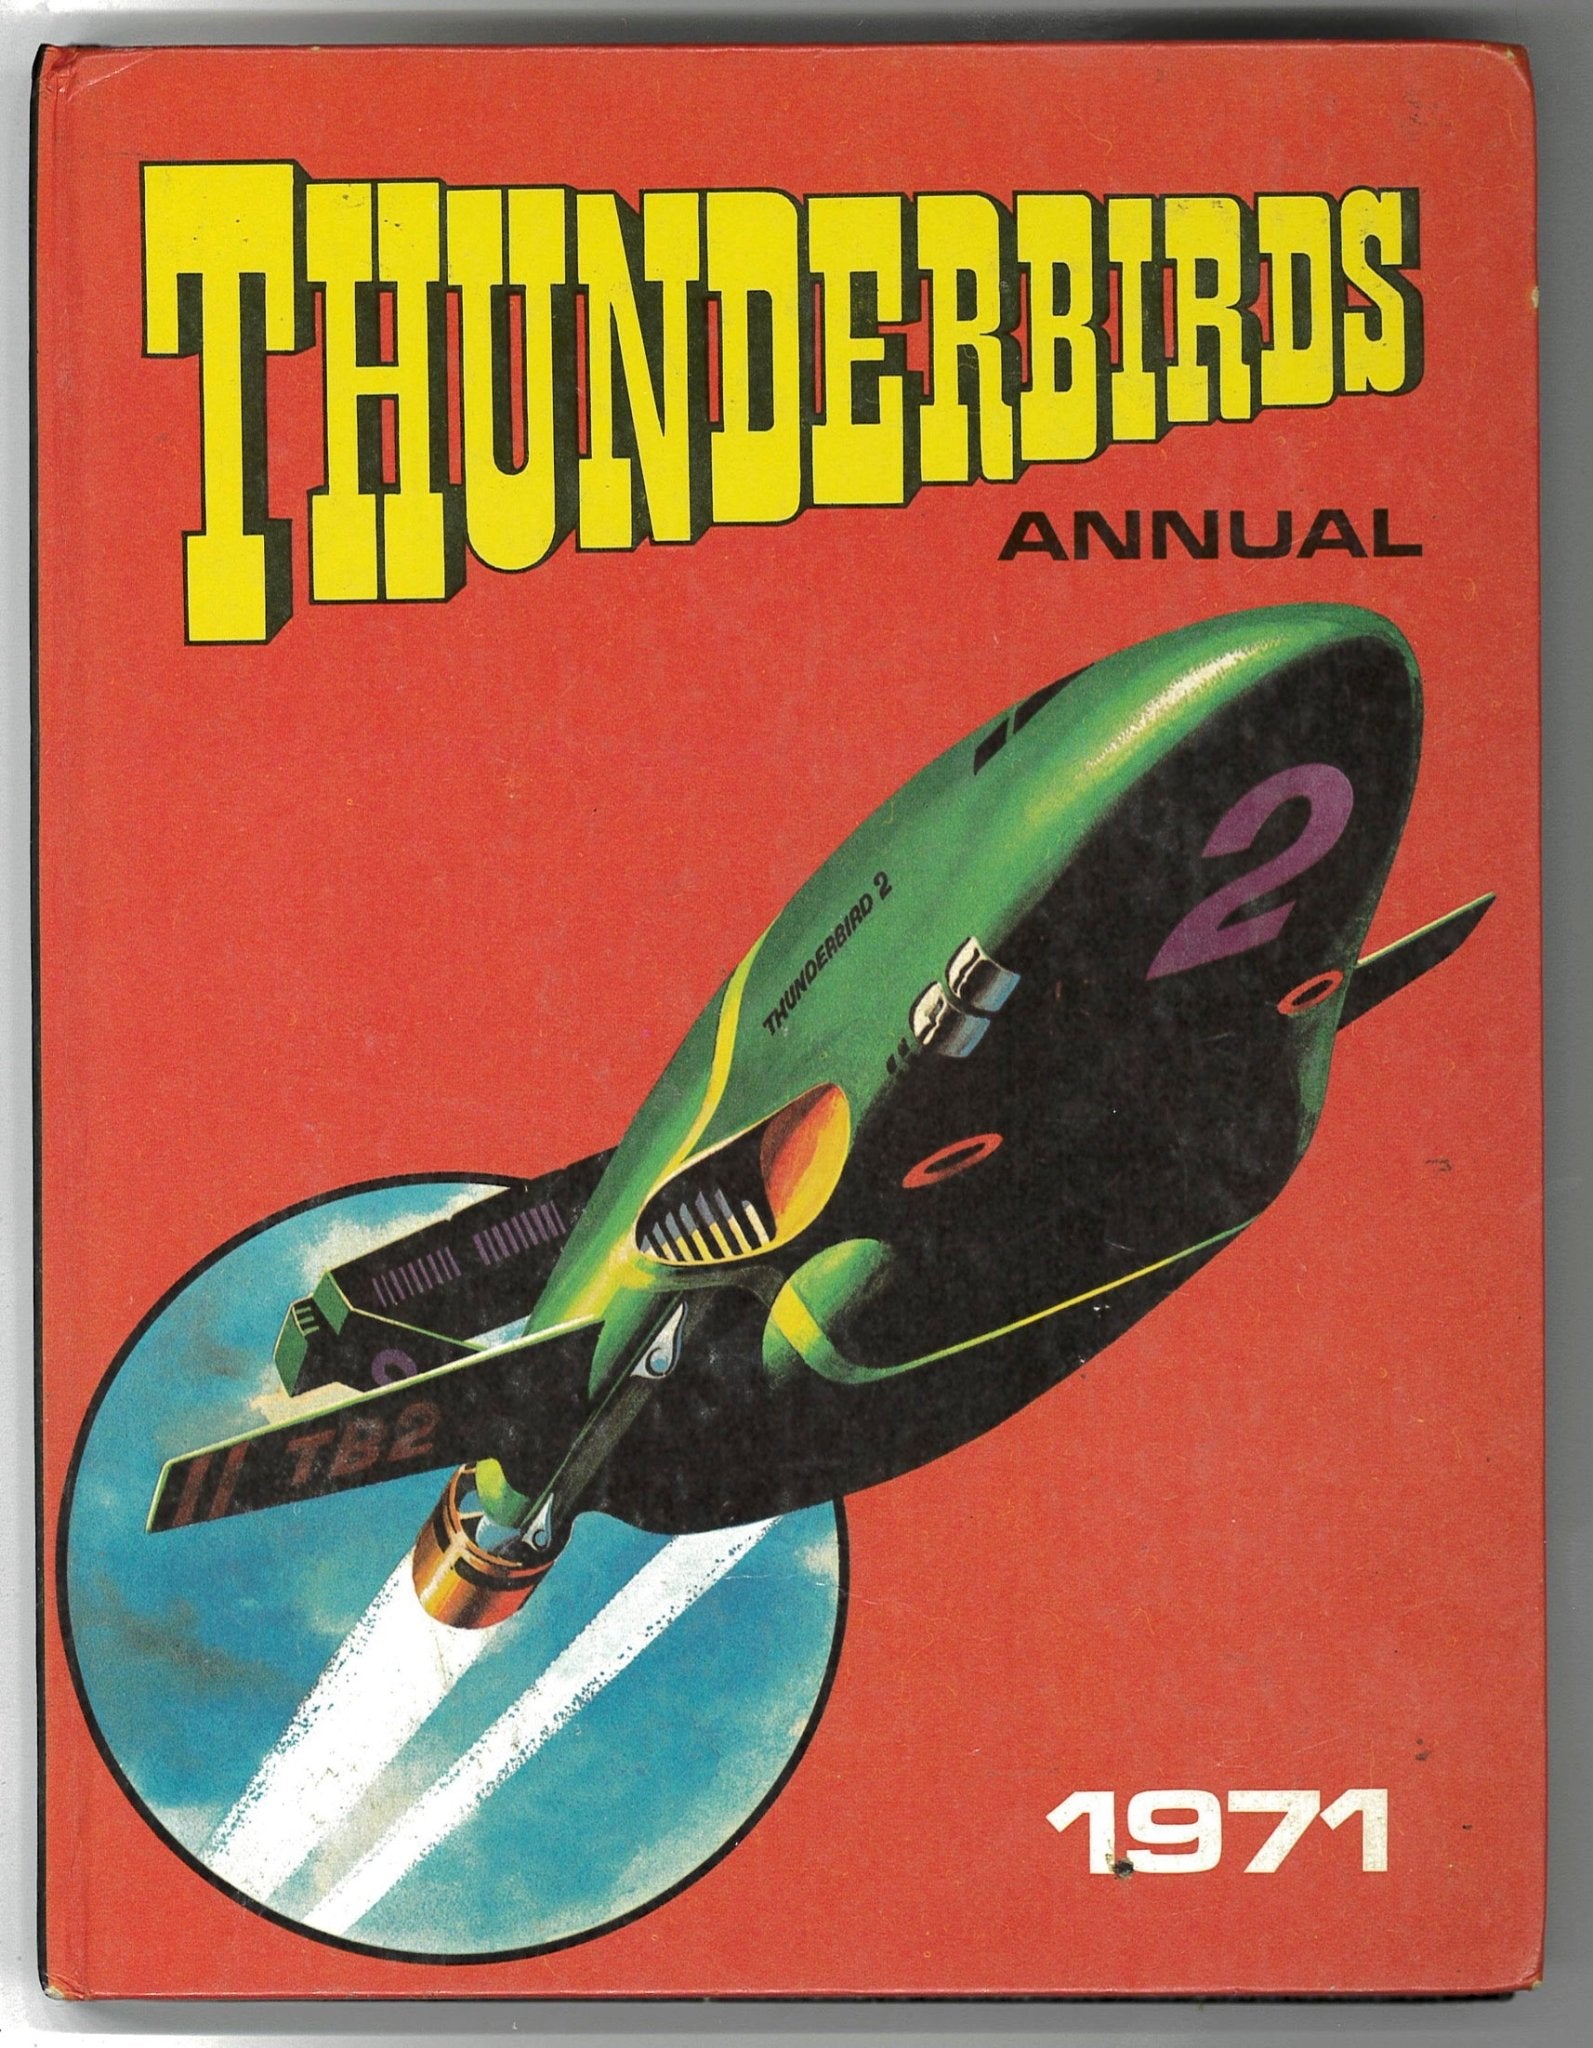 Thunderbirds Annual Covers - The Gerry Anderson Store